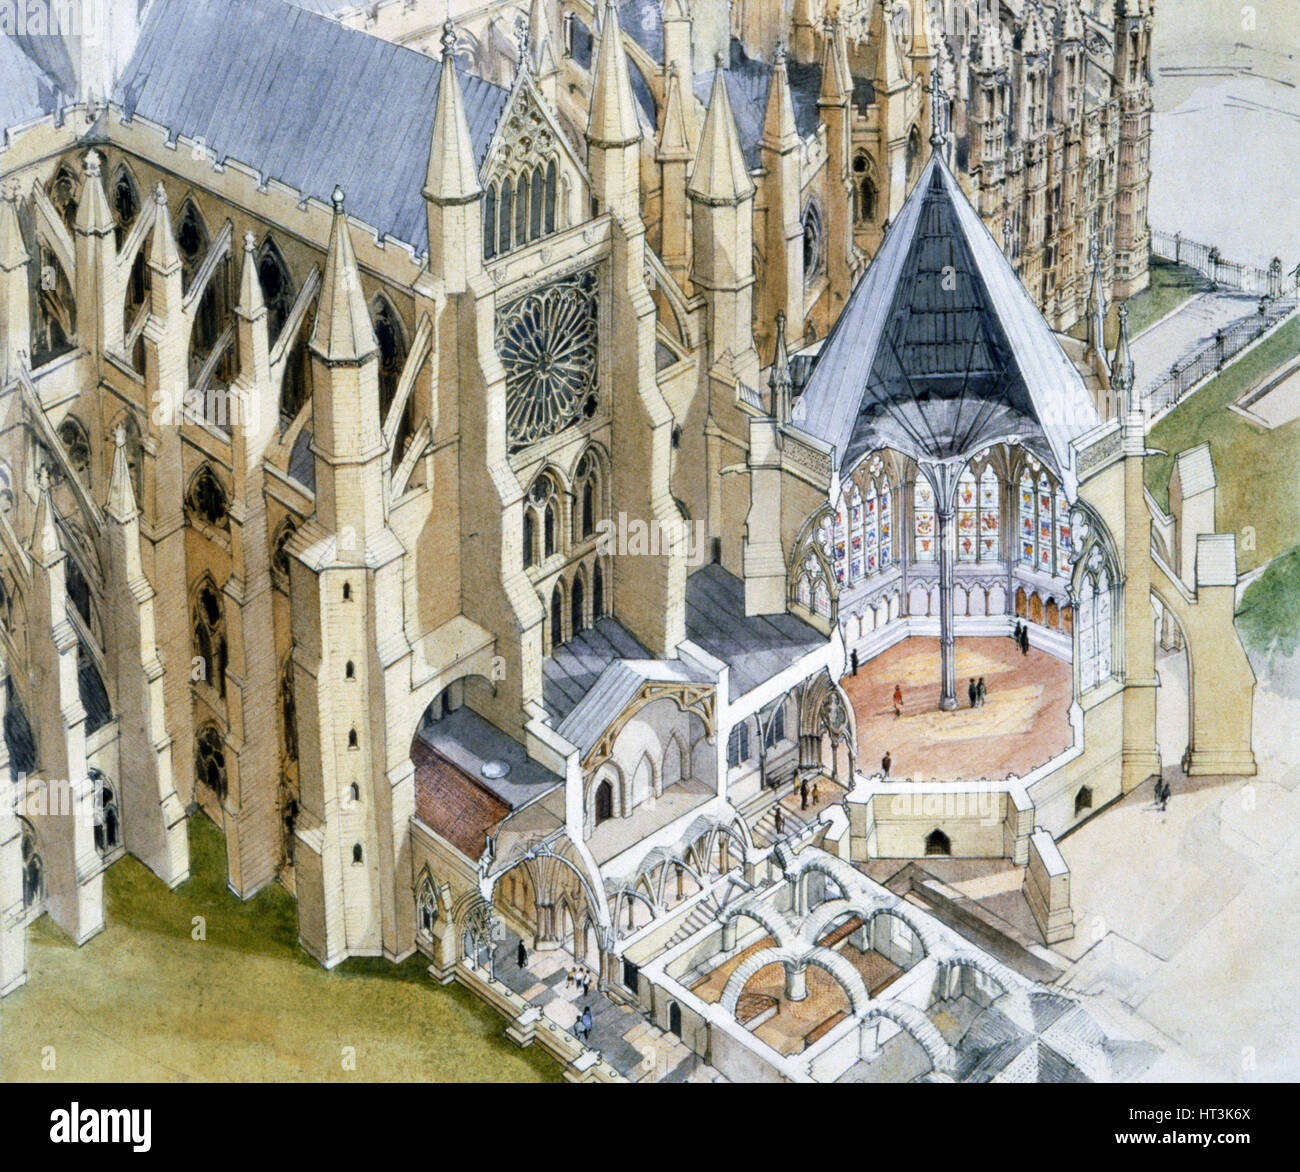 Westminster Abbey, Chapter House, c16th century, (c1990-2010) Artist: Terry Ball. Stock Photo